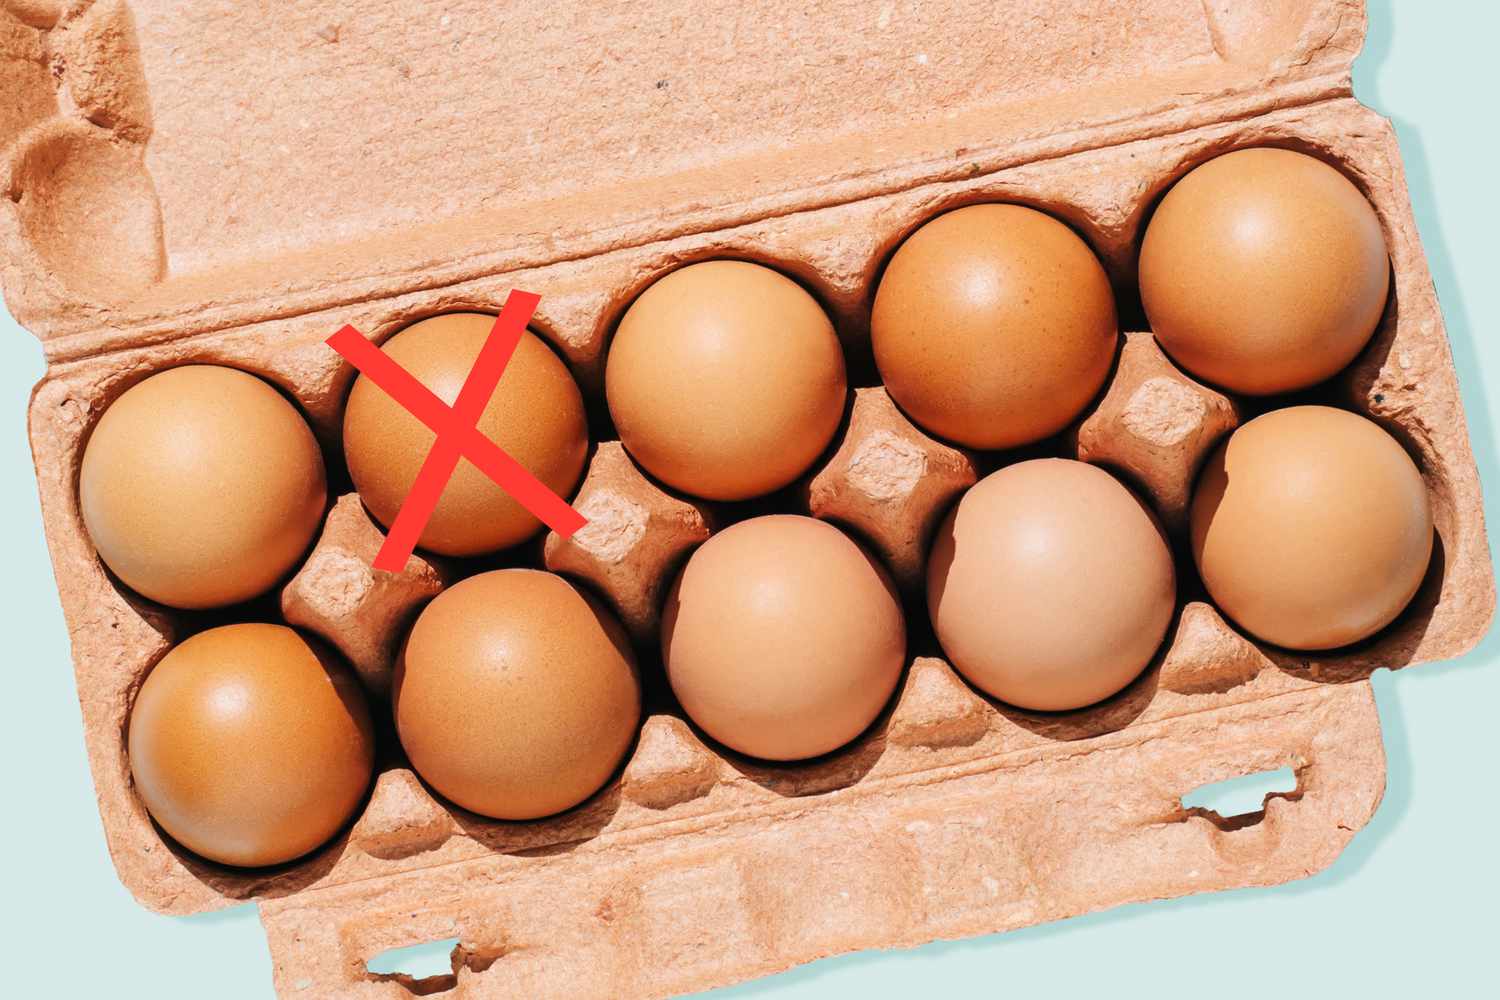 A carton of eggs on a blue background with a red X over one of the eggs